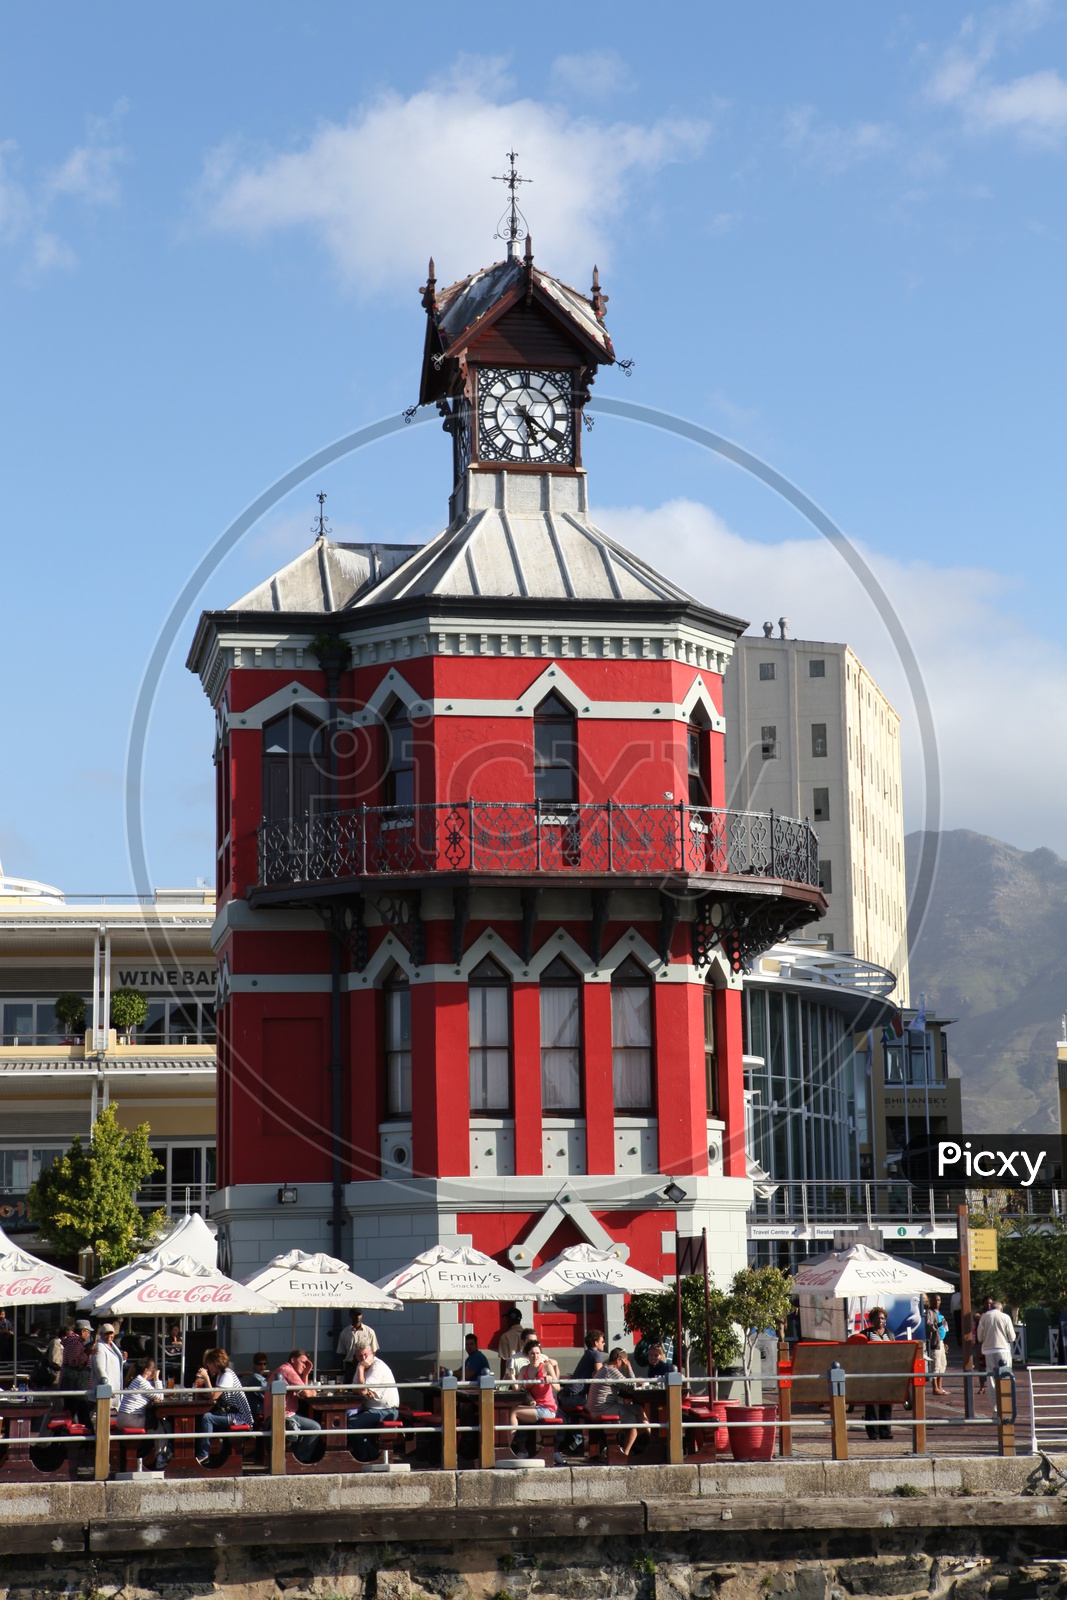 The historical clock tower of Victoria & Alfred Waterfront